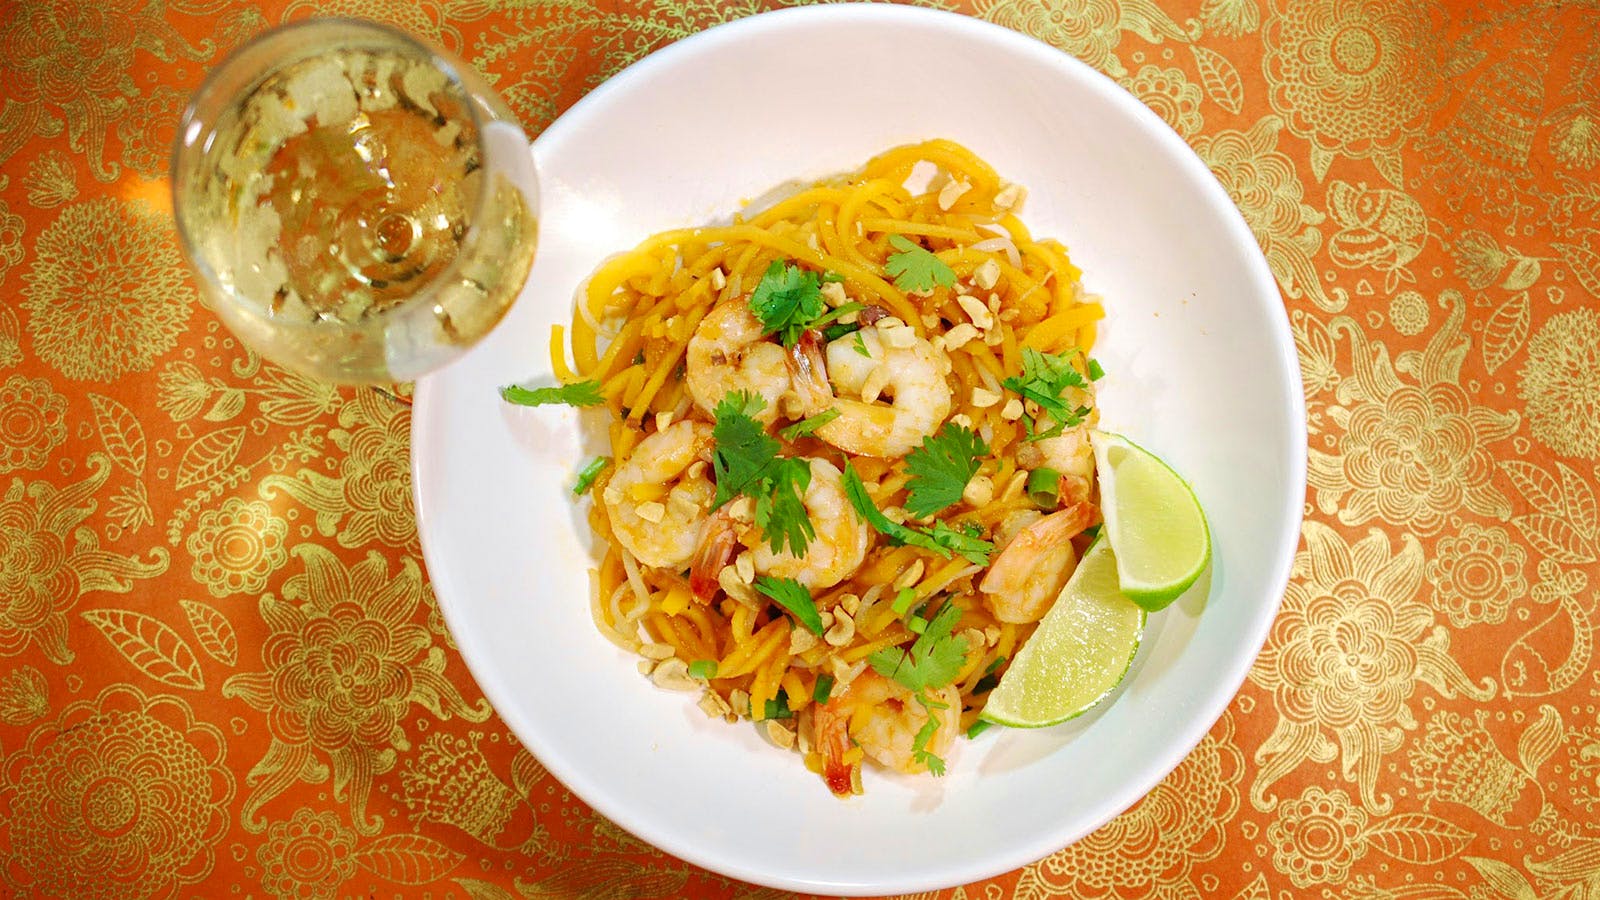 8 & $20: Butternut Squash Noodle Shrimp 'Pad Thai' with a French White